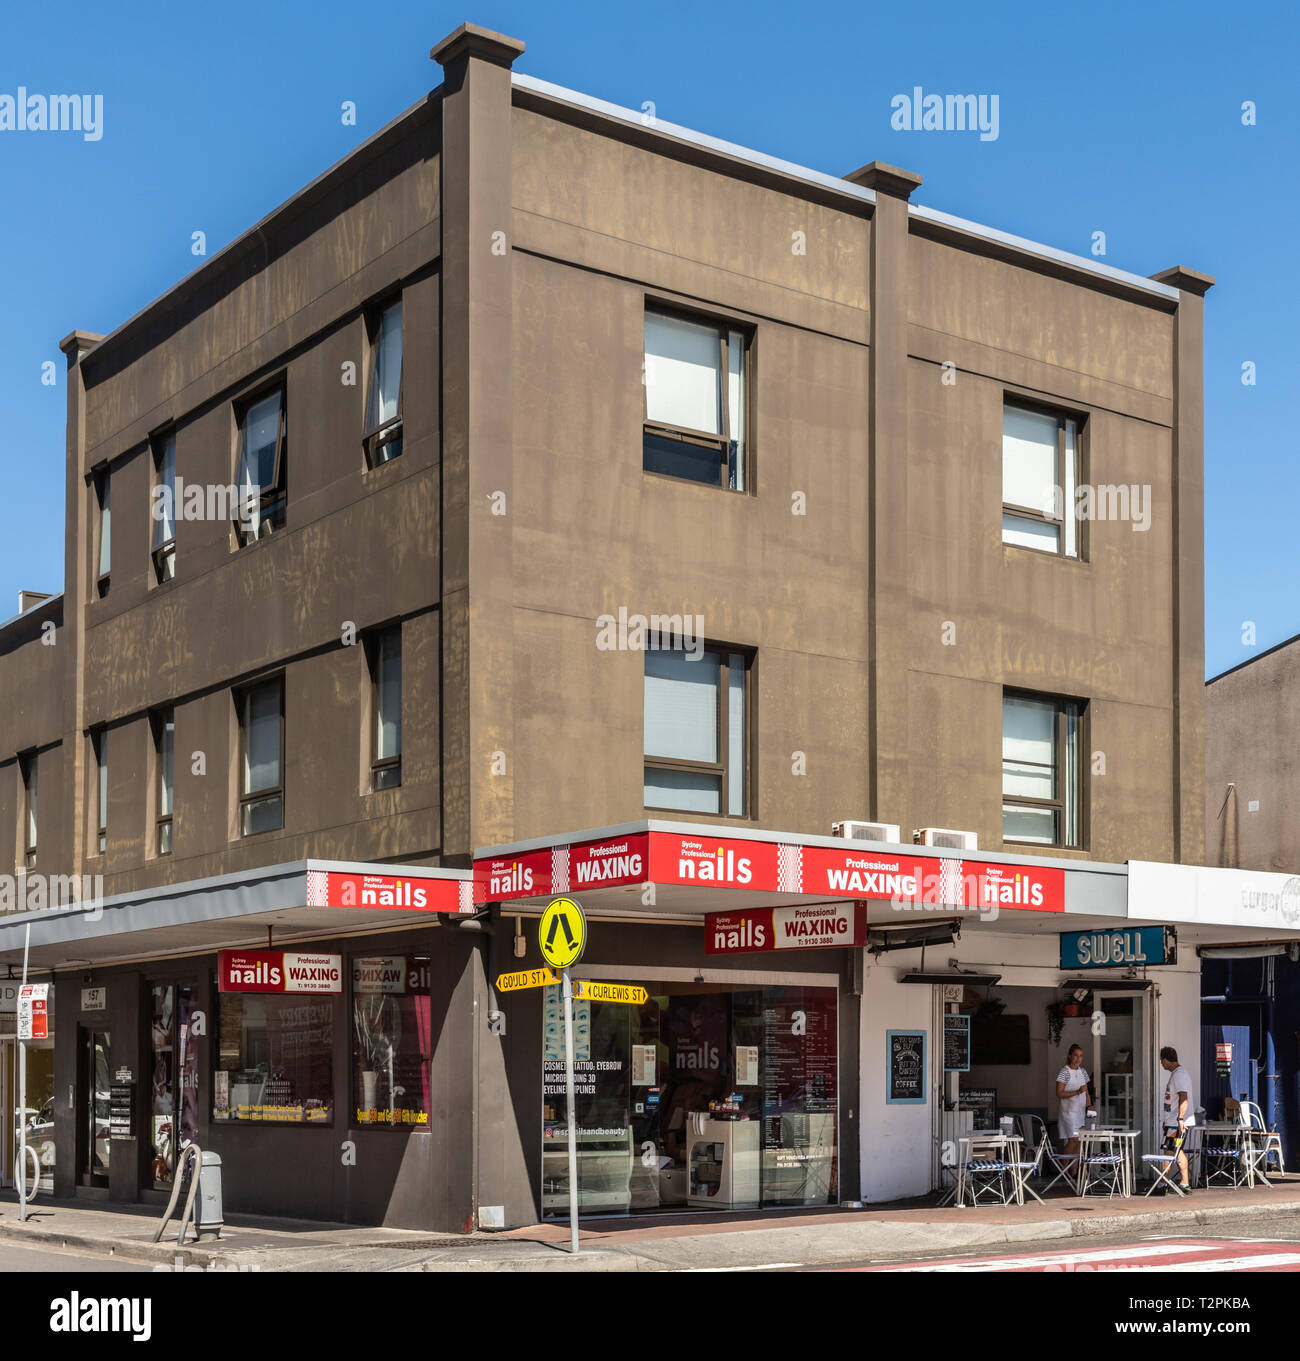 Sydney, Australia - February 11, 2019: Nails and waxing salon on corner of Gould and Curlewes street in Bondi Beach. White on red advertisements, disp Stock Photo